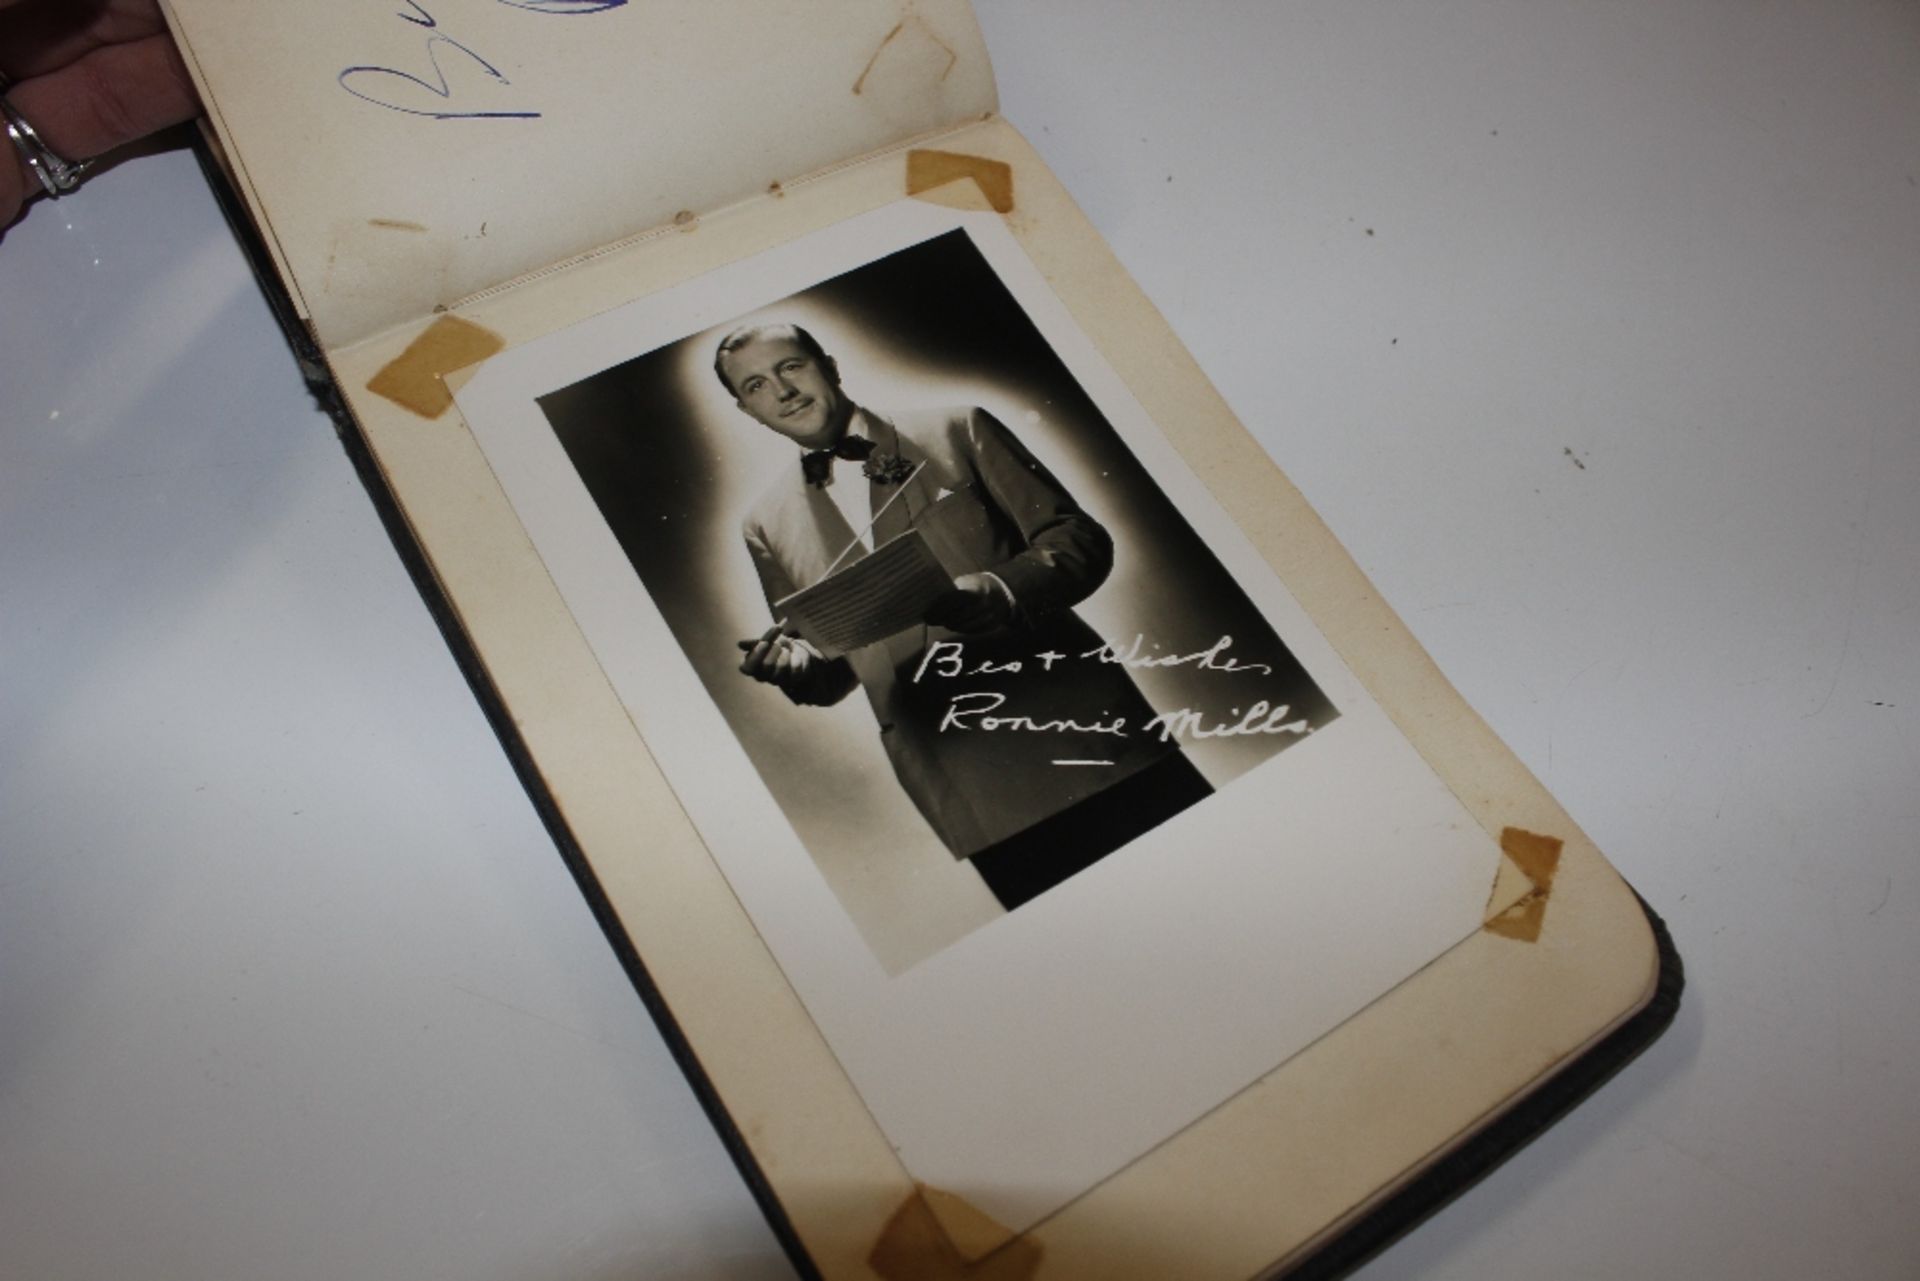 An autograph book including some photographs of ce - Image 9 of 13